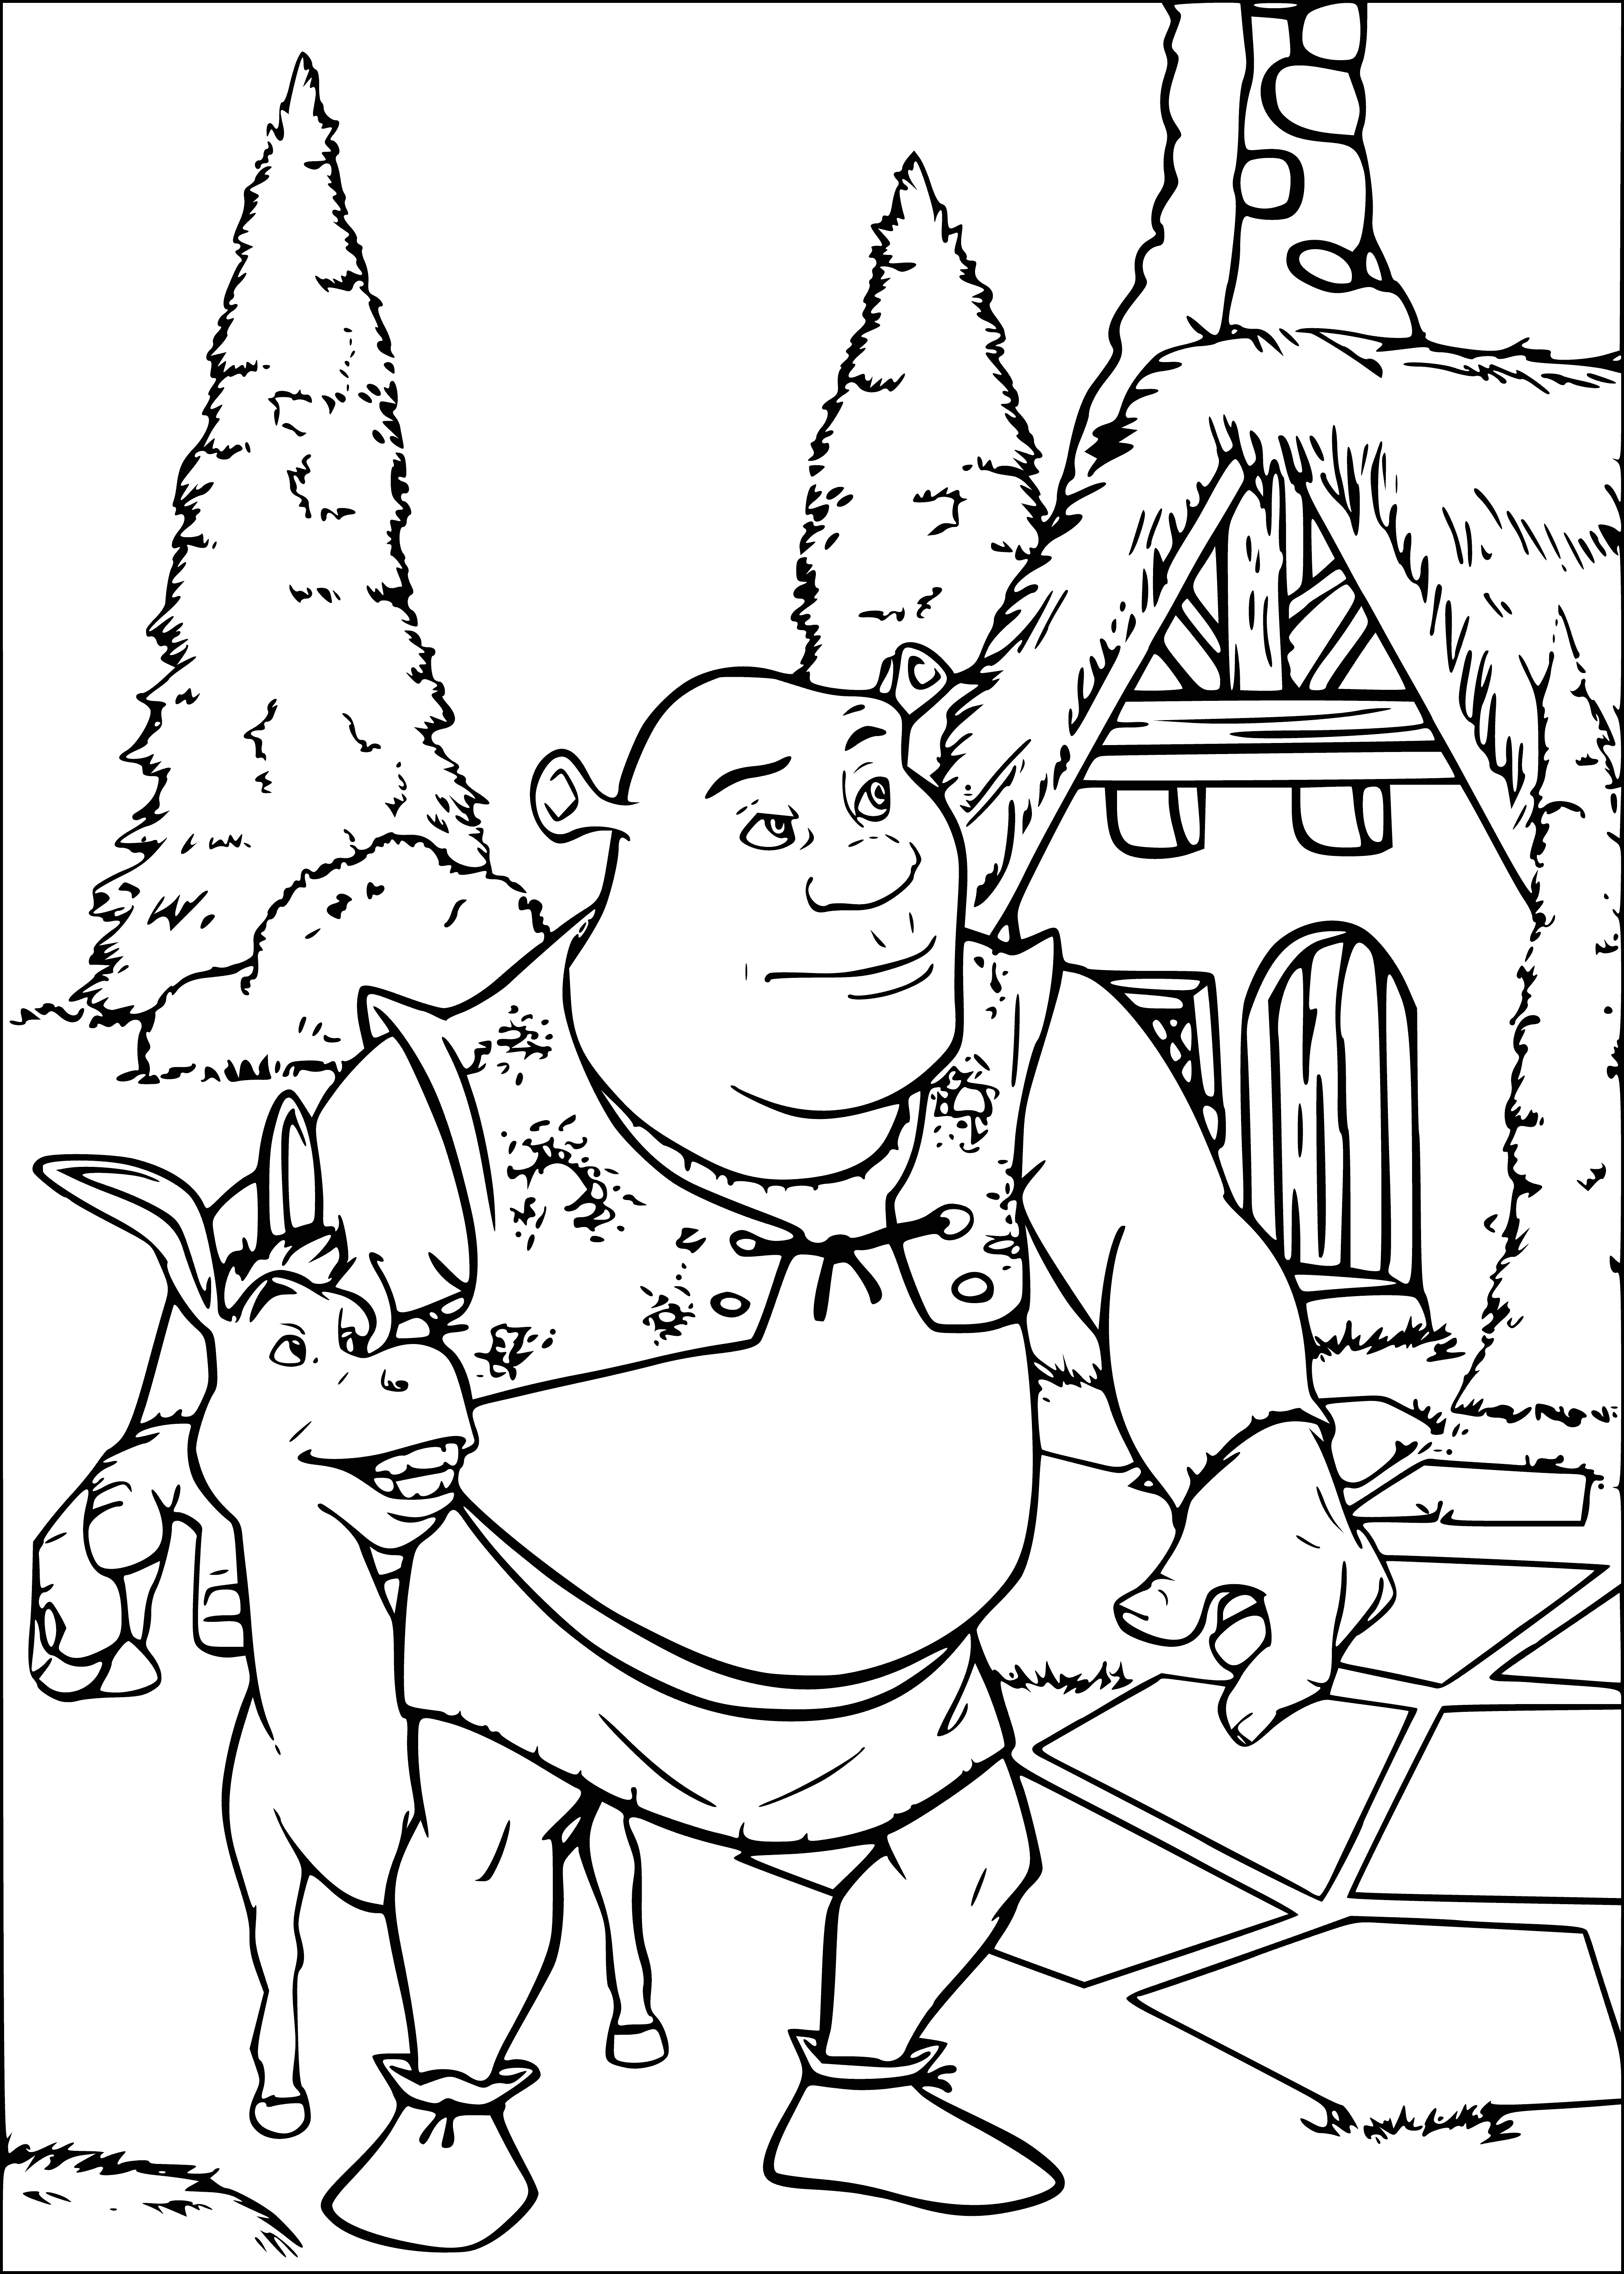 Shrek and Donkey coloring page